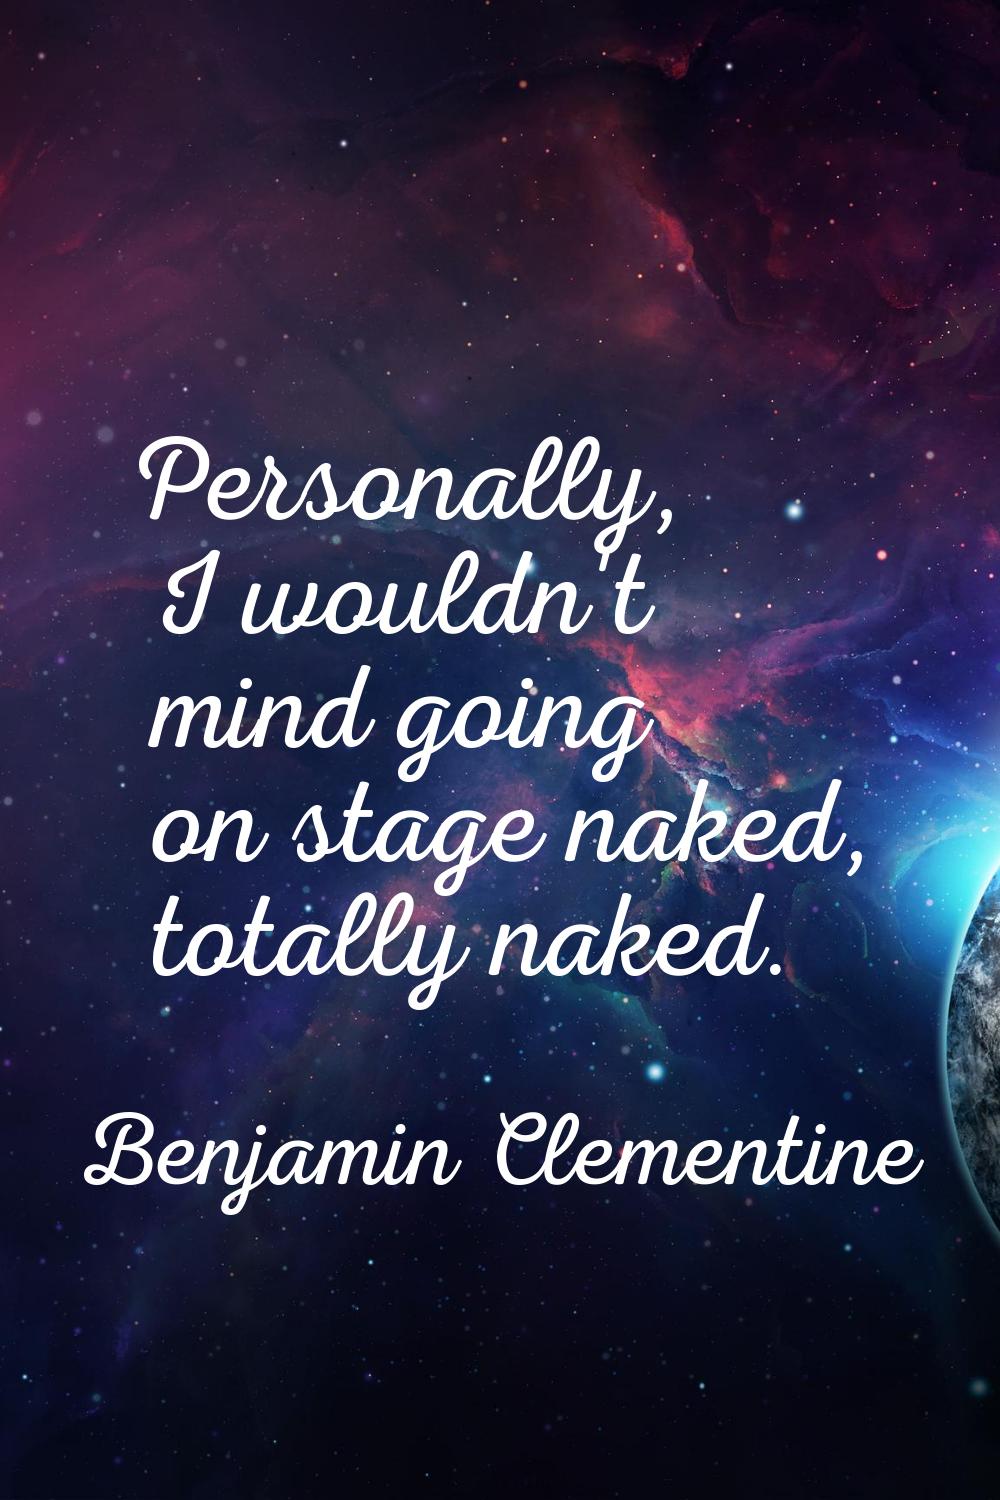 Personally, I wouldn't mind going on stage naked, totally naked.